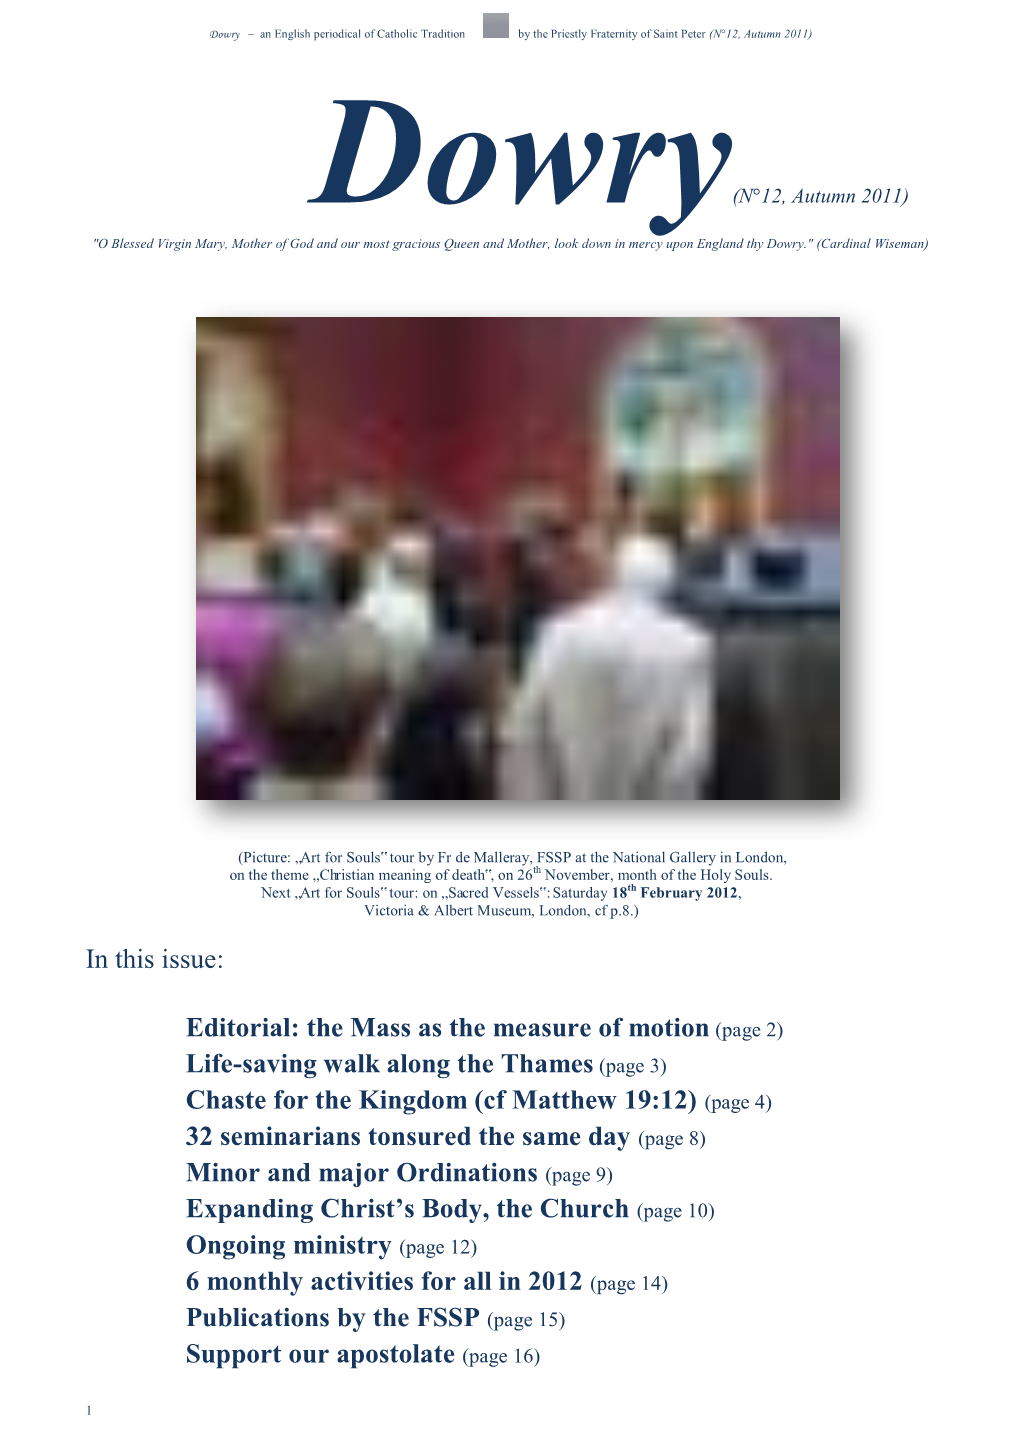 Publications by the FSSP (Page 15) Support Our Apostolate (Page 16)